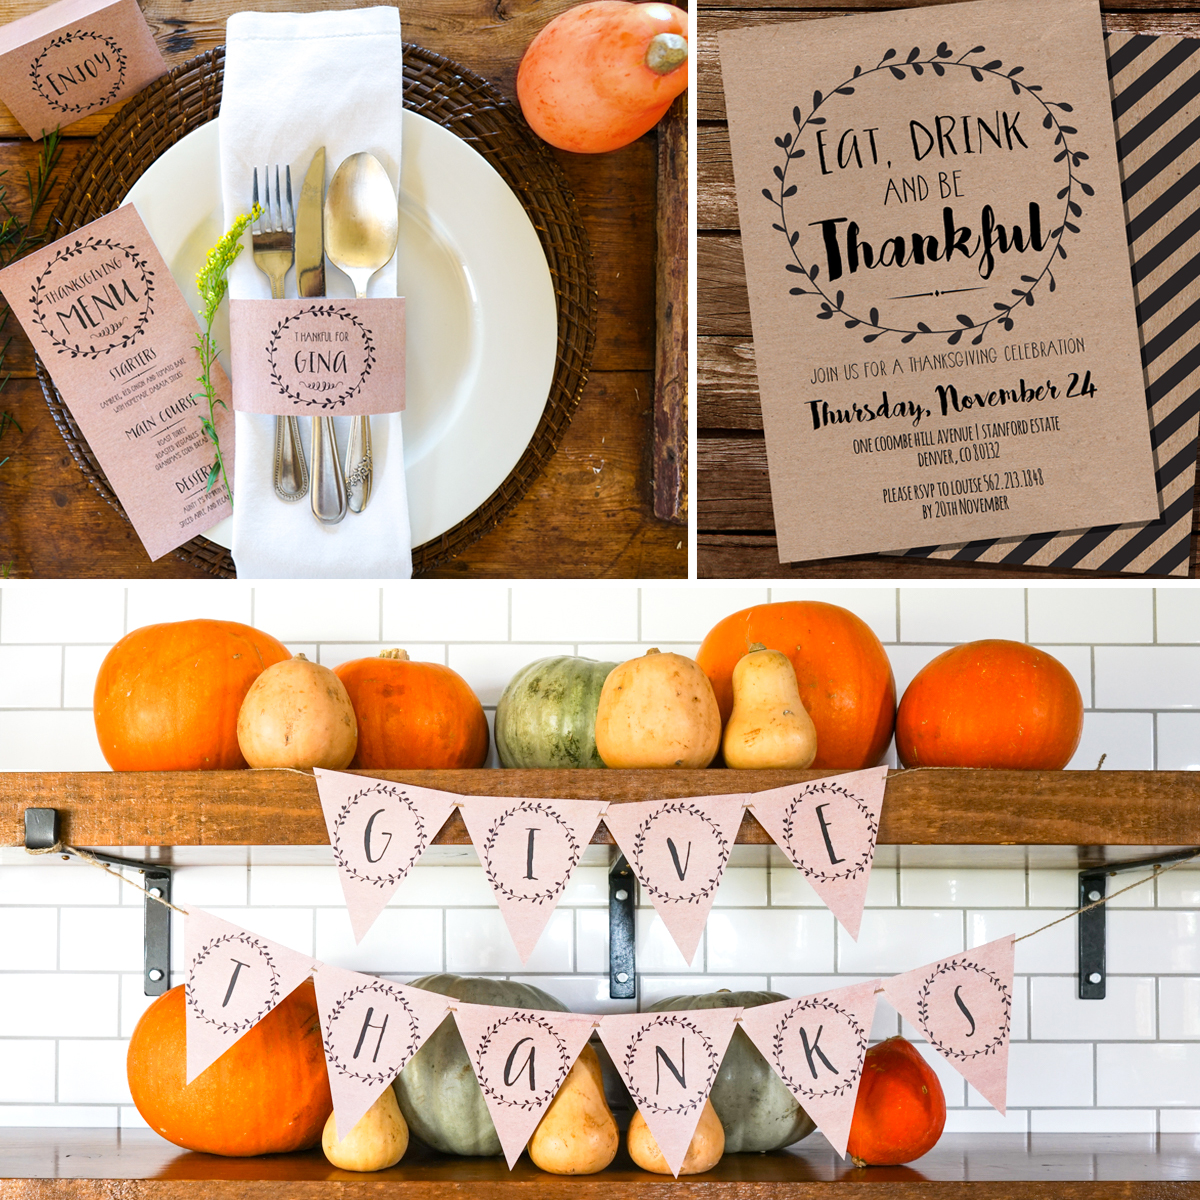 Thanksgiving Craft Invitation, banner, menu and place setting 